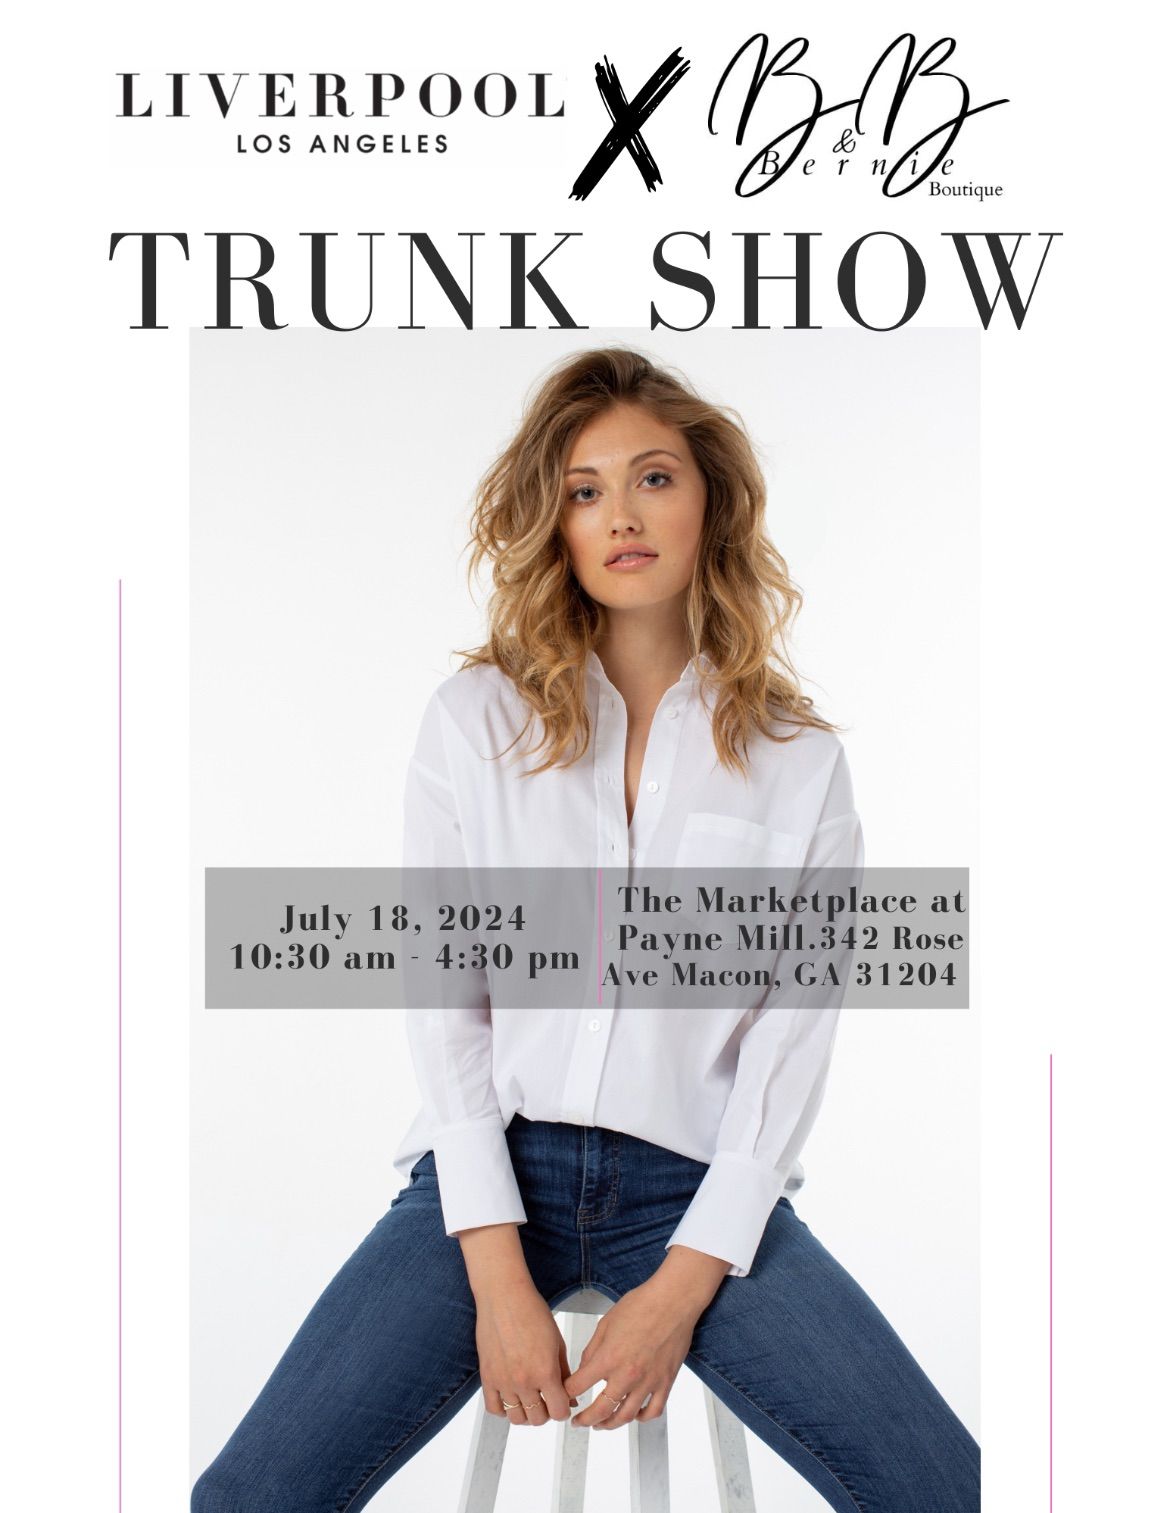 Liverpool Trunk Show with BB & Bernie